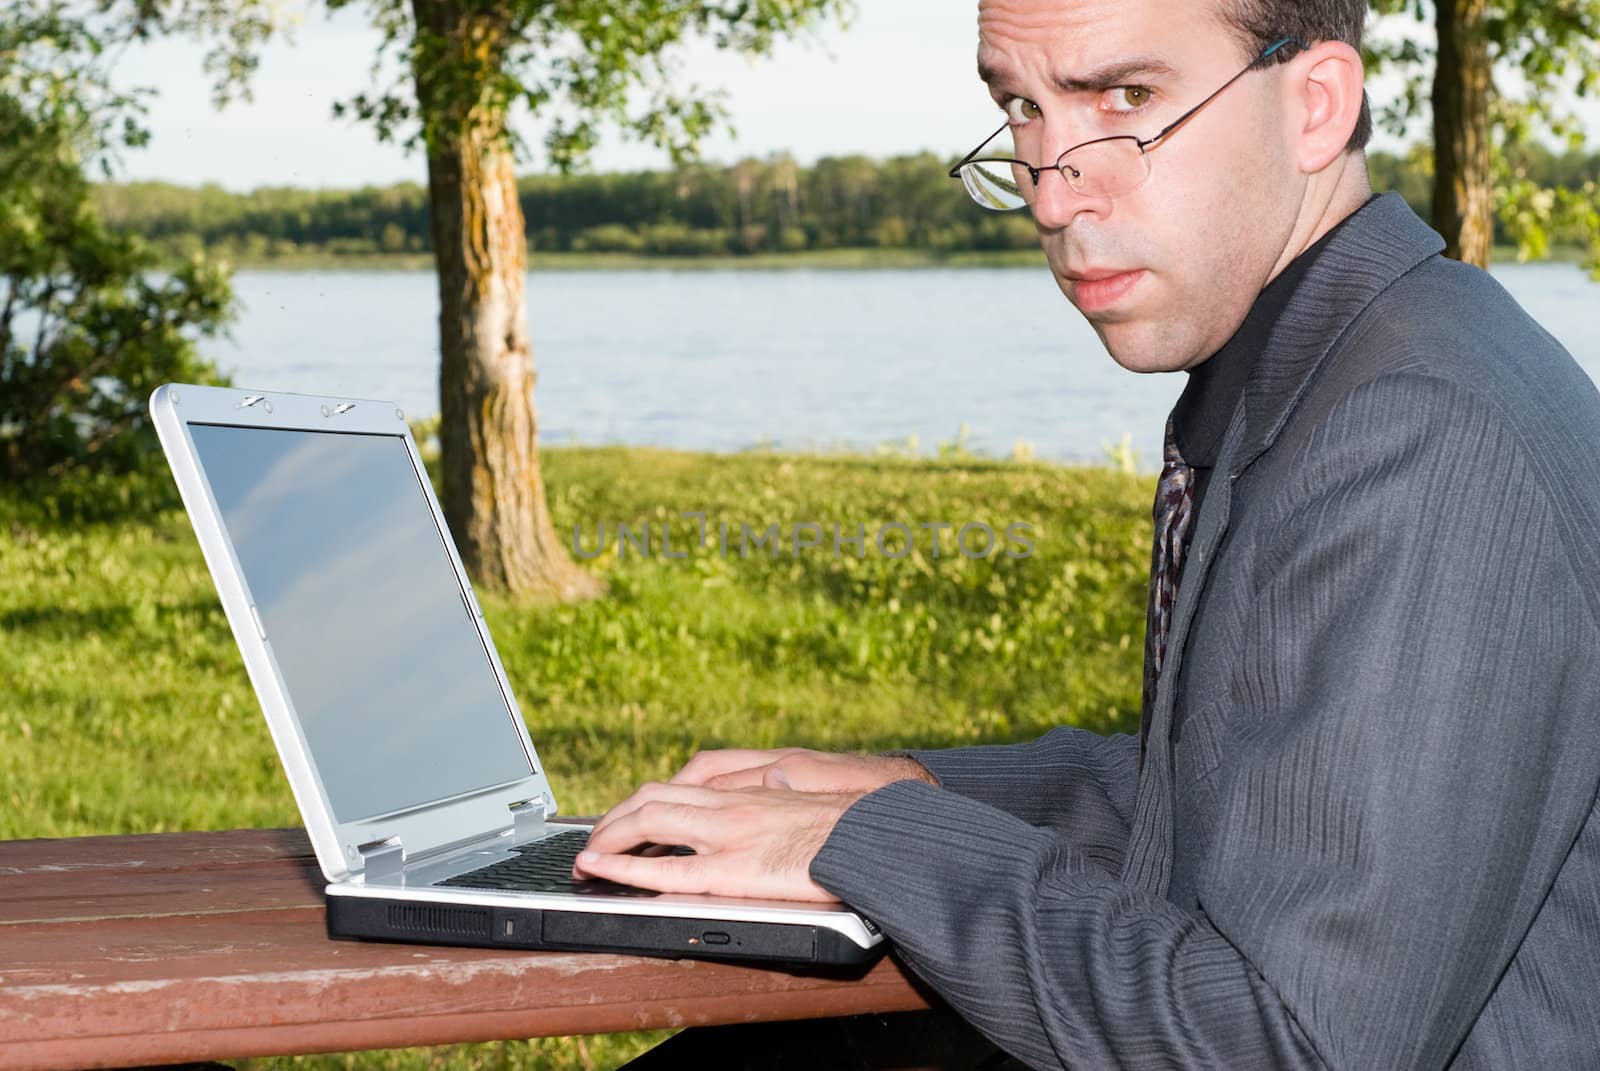 A serious employee working on his laptop outside in a park